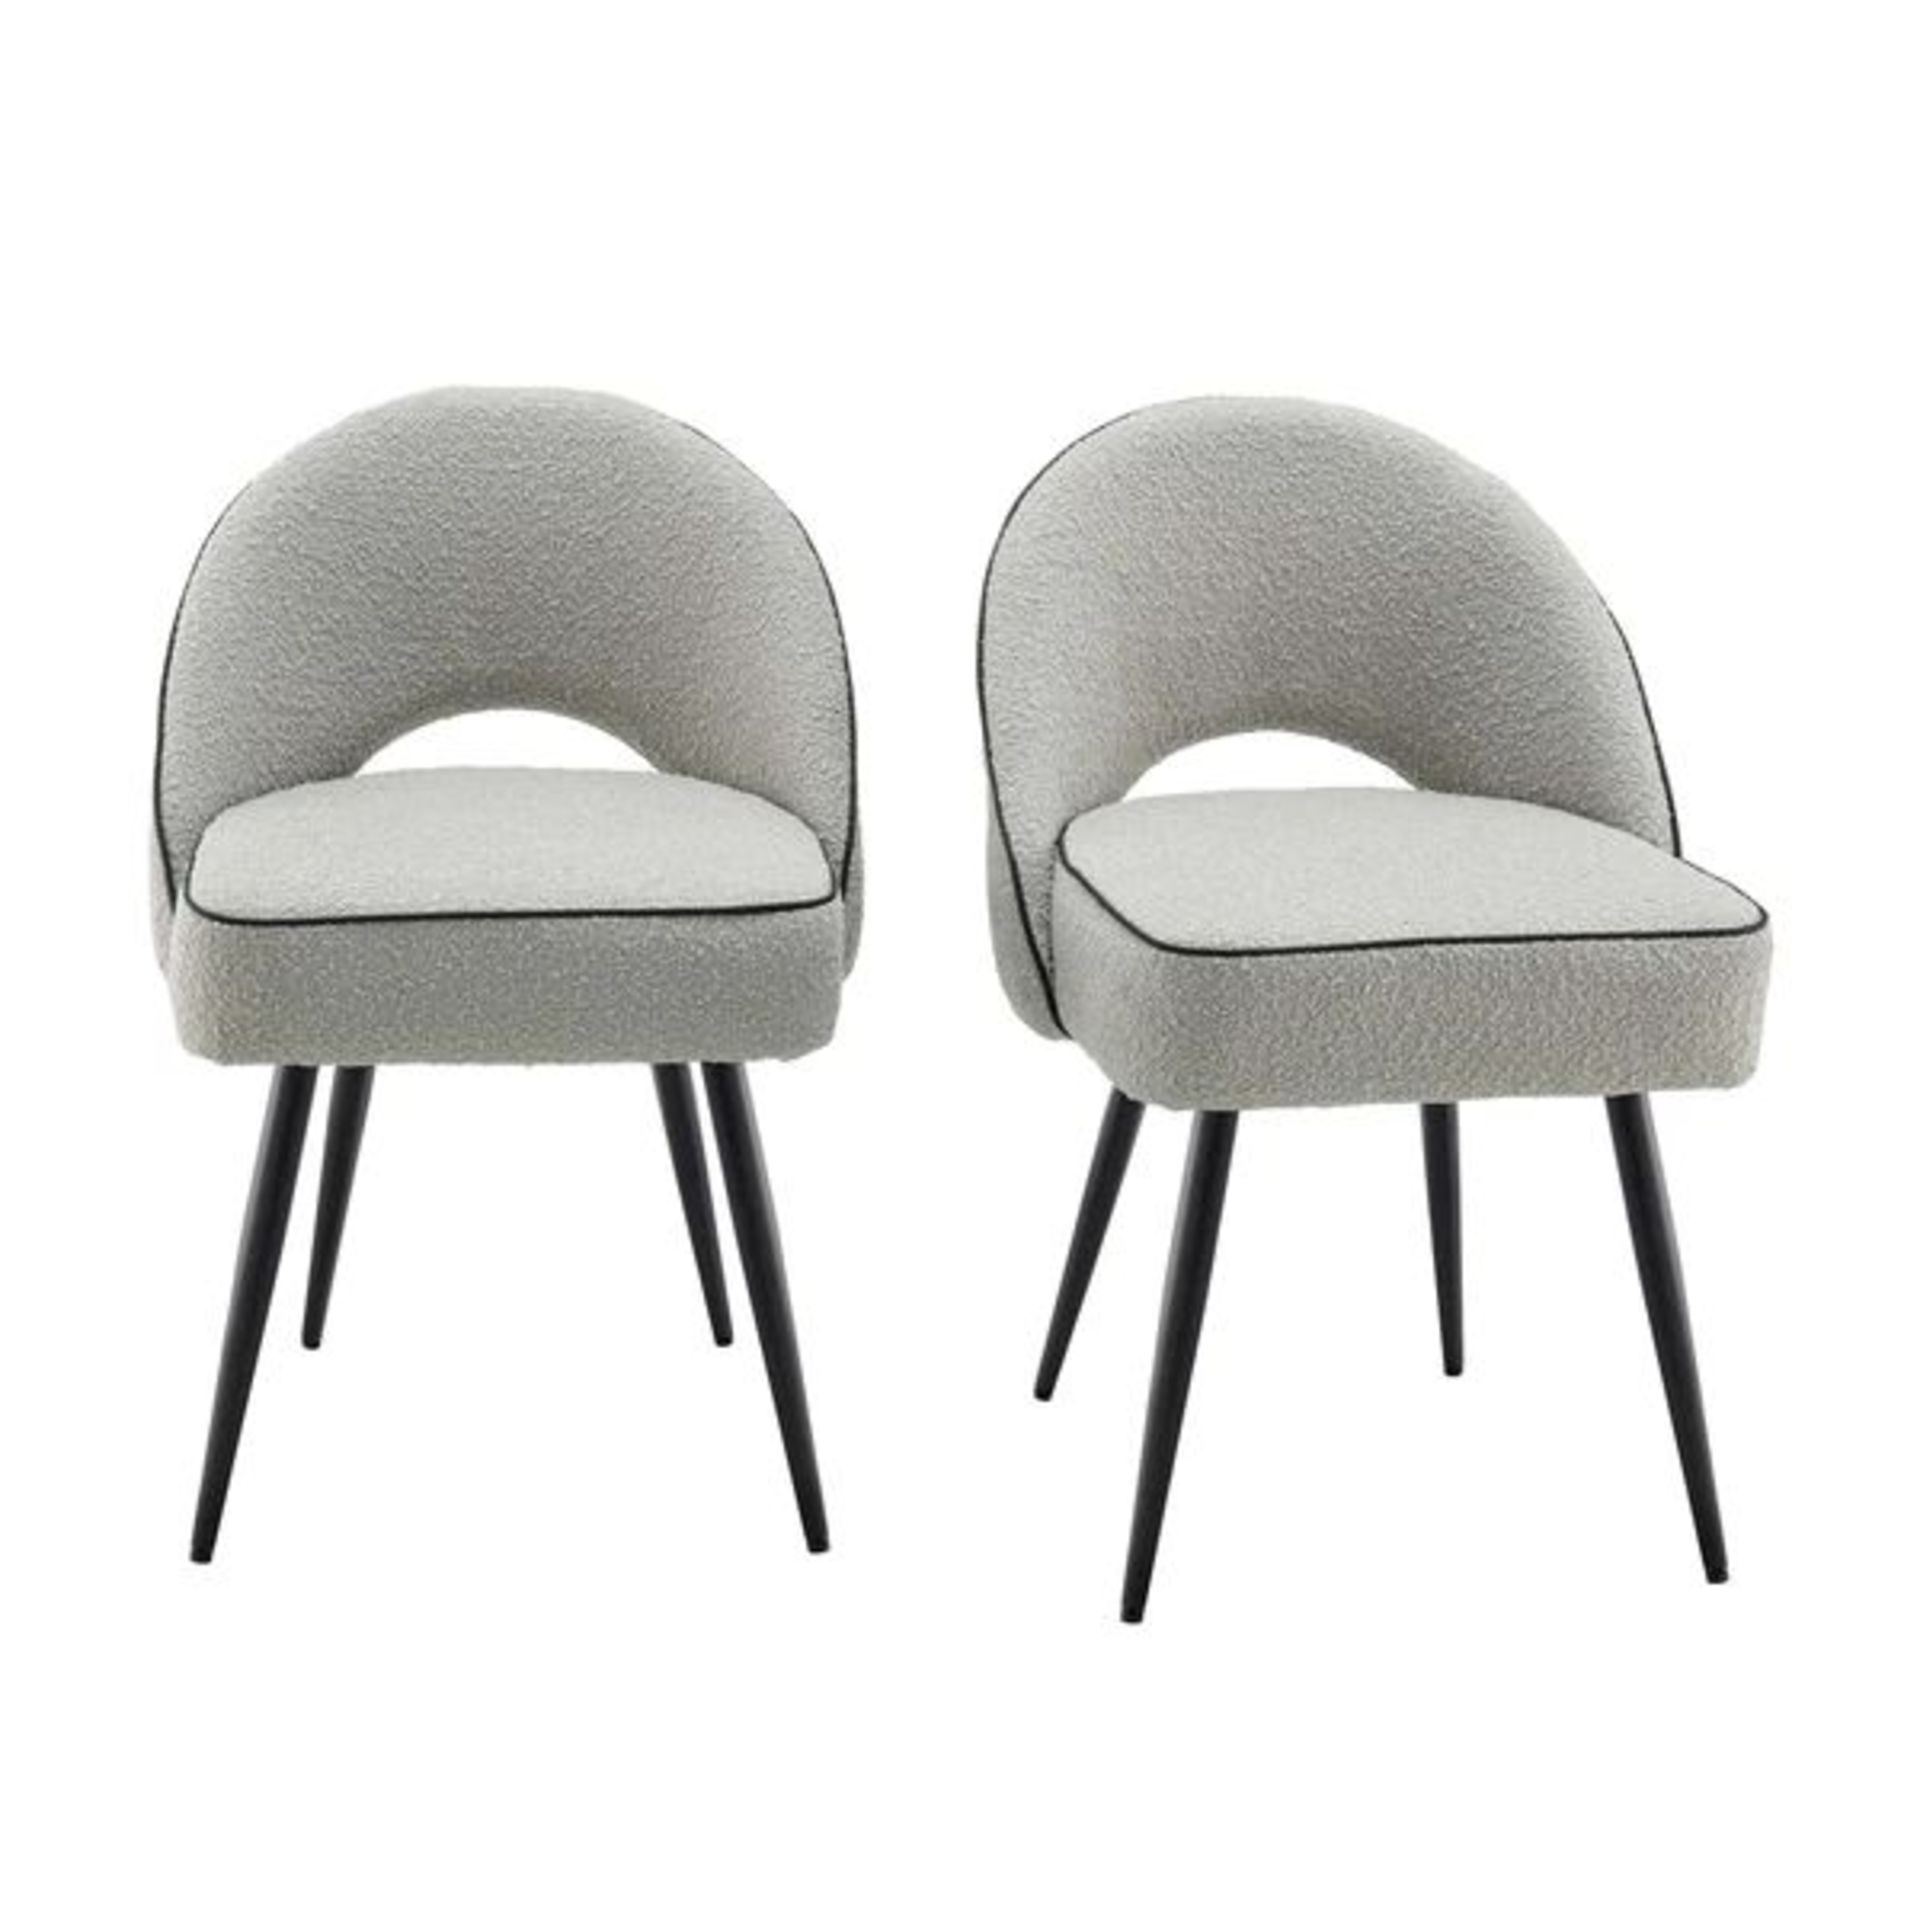 Oakley Set of 2 Grey Boucle Upholstered Dining Chairs with Piping. -ER30. RRP £299.99. Our beloved - Image 2 of 2